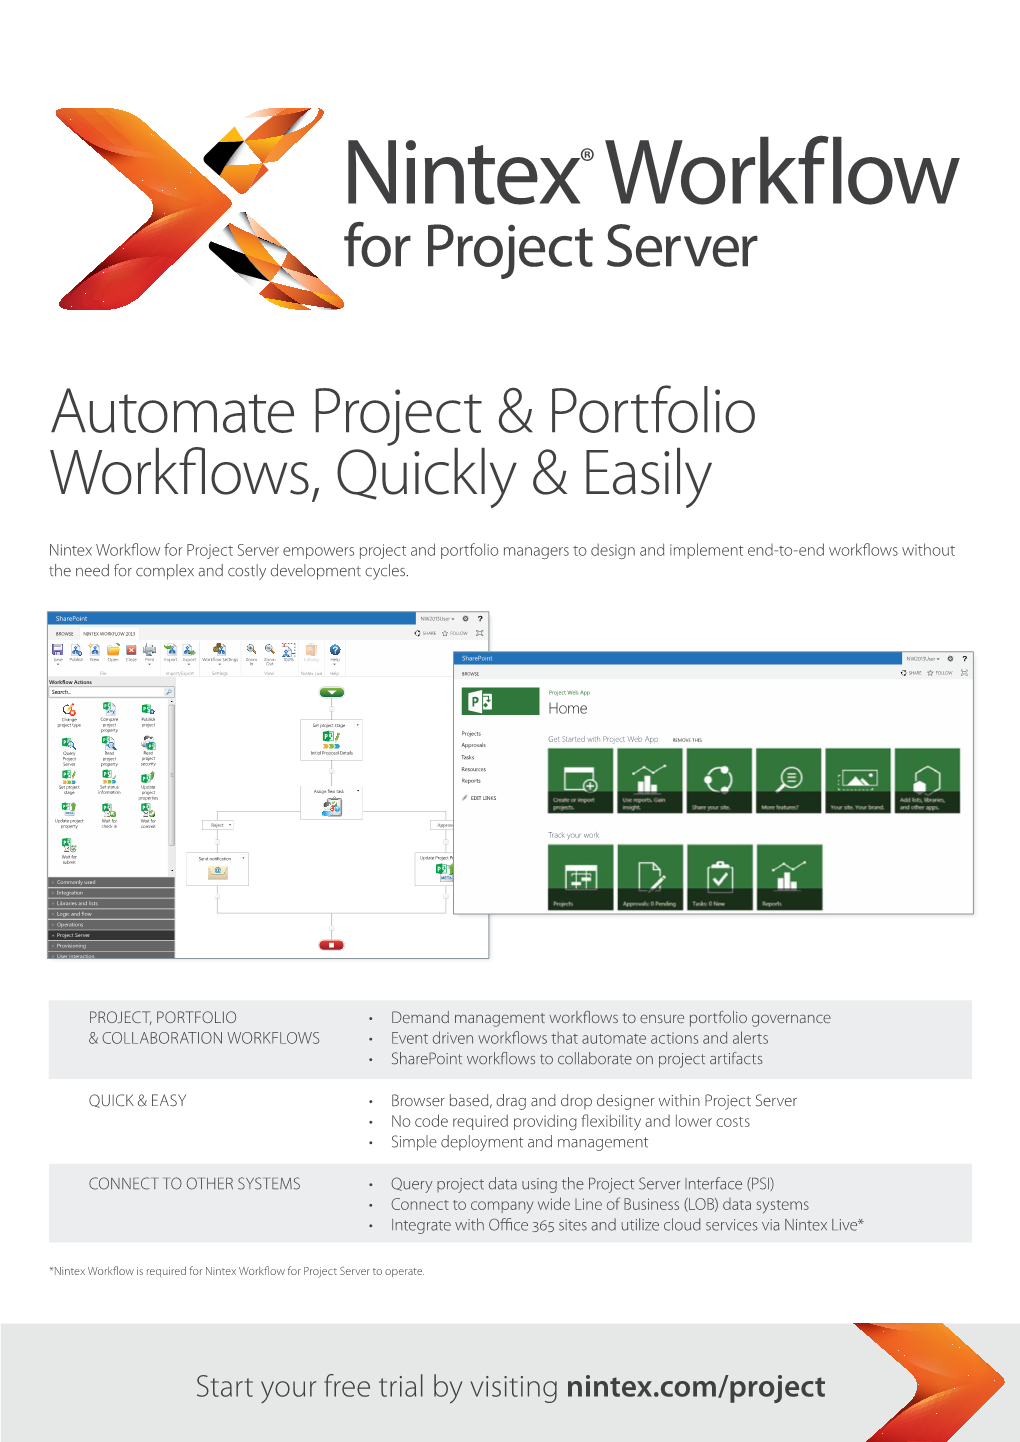 Automate Project & Portfolio Workflows, Quickly & Easily